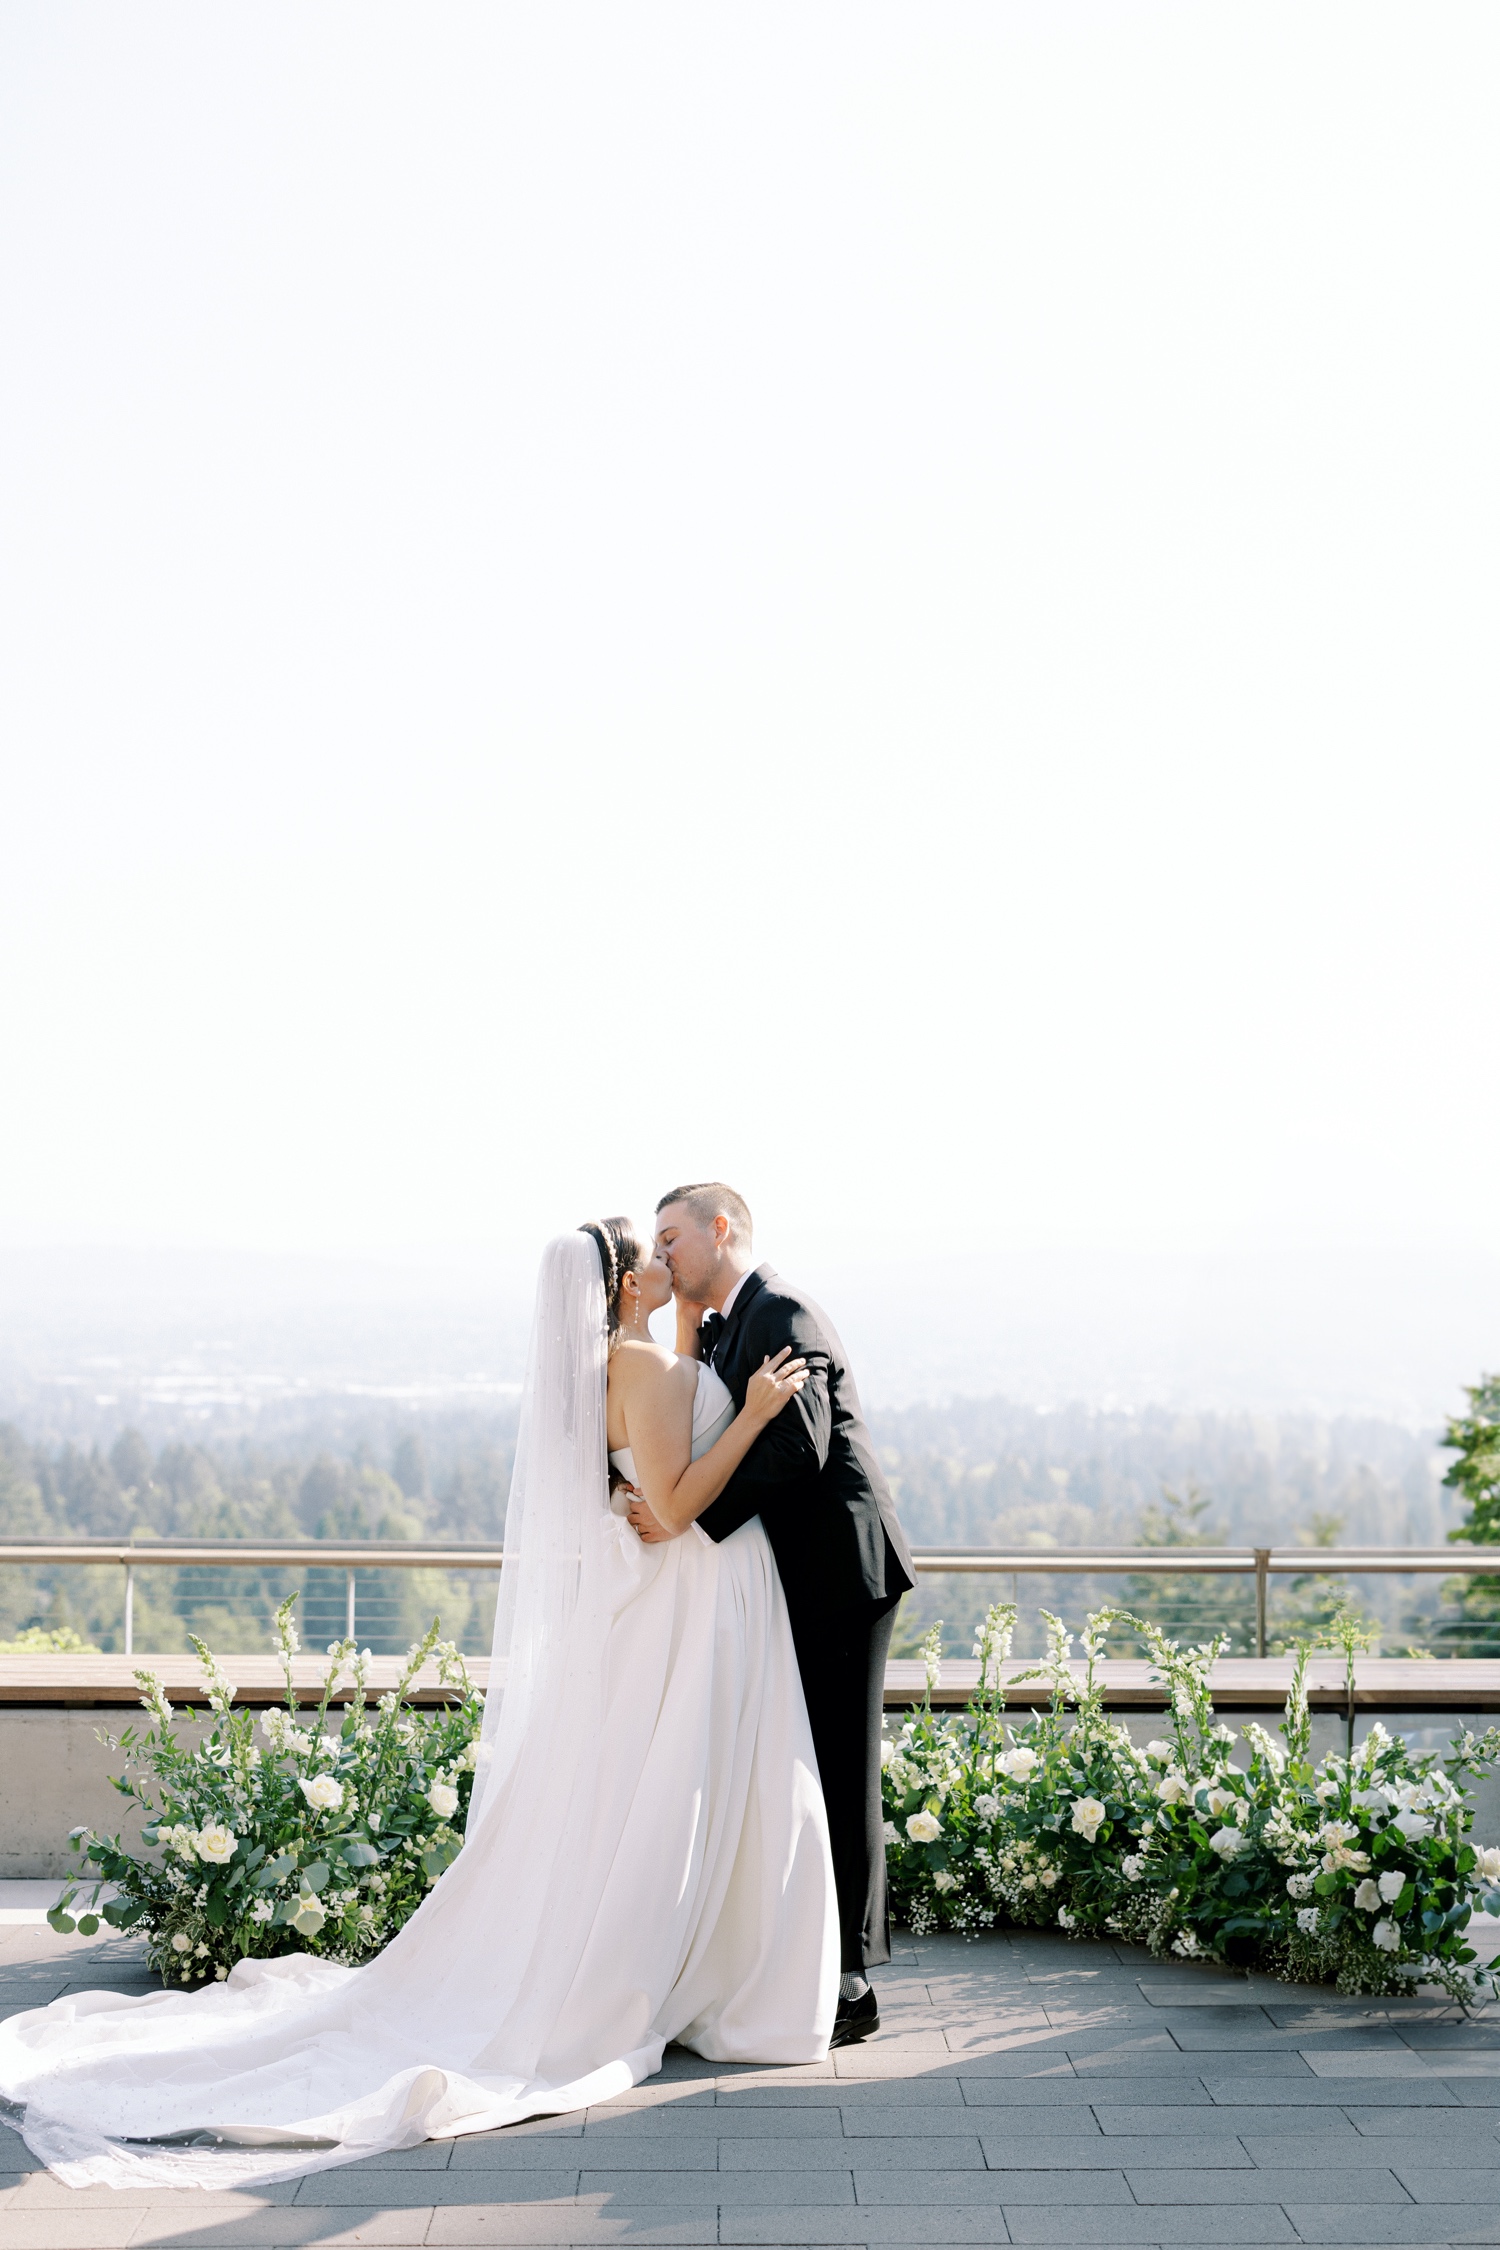 Bride and groom share first kiss at Amaterra Winery wedding